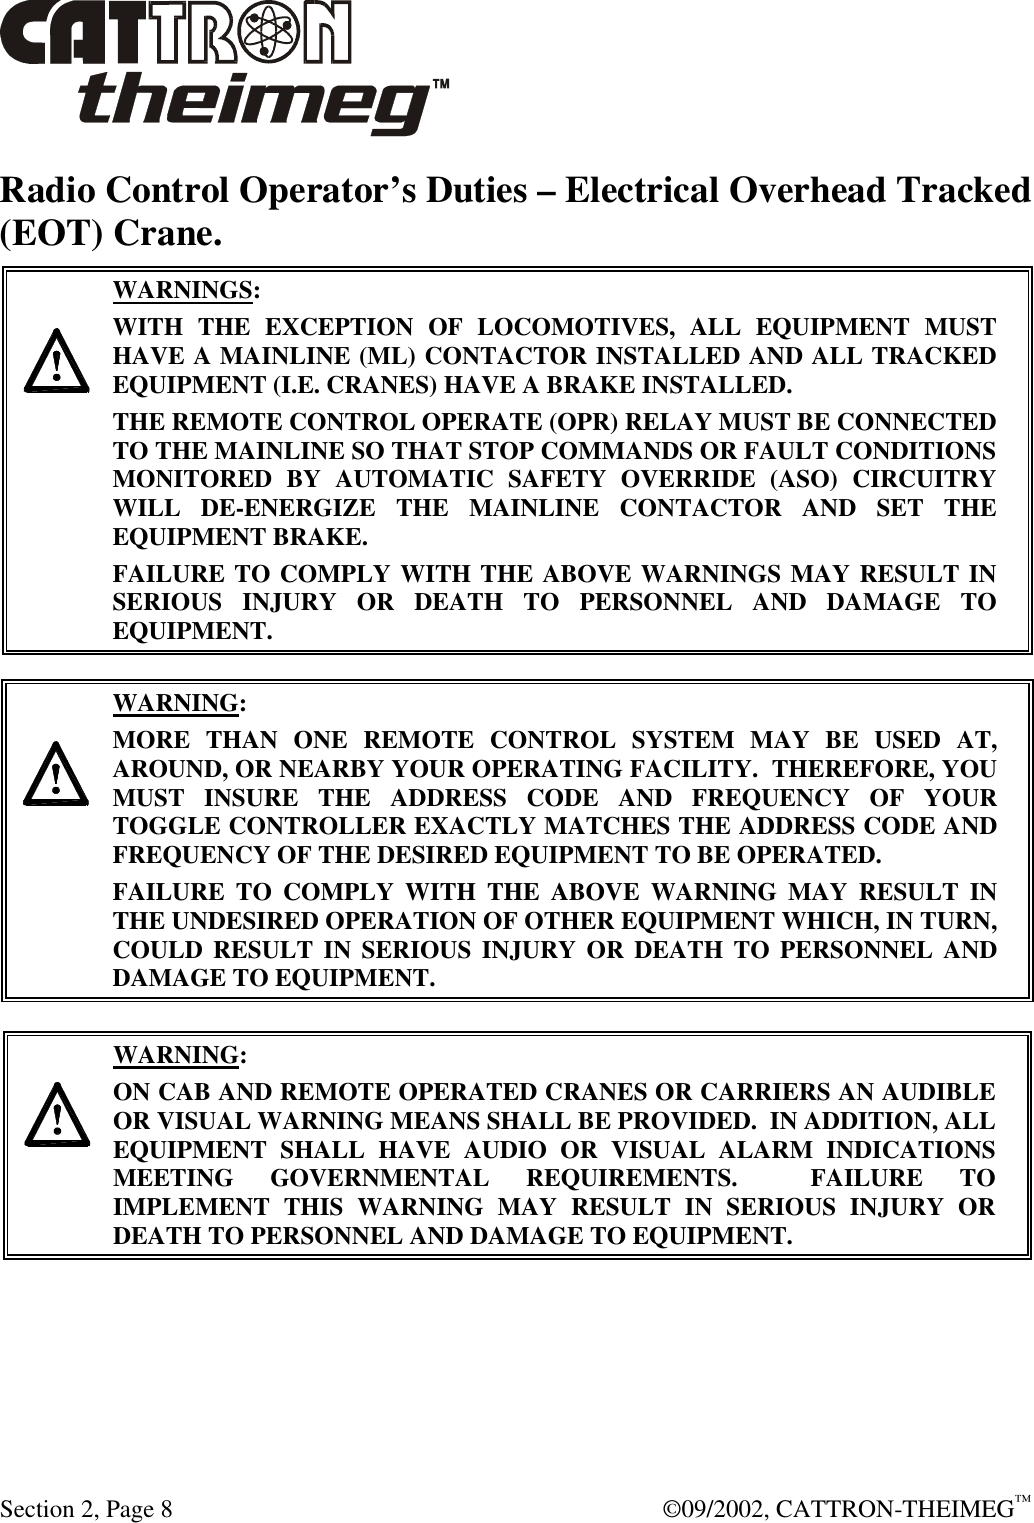  Section 2, Page 8  ©09/2002, CATTRON-THEIMEG™ Radio Control Operator’s Duties – Electrical Overhead Tracked (EOT) Crane.      WARNINGS: WITH THE EXCEPTION OF LOCOMOTIVES, ALL EQUIPMENT MUST HAVE A MAINLINE (ML) CONTACTOR INSTALLED AND ALL TRACKED EQUIPMENT (I.E. CRANES) HAVE A BRAKE INSTALLED. THE REMOTE CONTROL OPERATE (OPR) RELAY MUST BE CONNECTED TO THE MAINLINE SO THAT STOP COMMANDS OR FAULT CONDITIONS MONITORED BY AUTOMATIC SAFETY OVERRIDE (ASO) CIRCUITRY WILL DE-ENERGIZE THE MAINLINE CONTACTOR AND SET THE EQUIPMENT BRAKE.  FAILURE TO COMPLY WITH THE ABOVE WARNINGS MAY RESULT IN SERIOUS INJURY OR DEATH TO PERSONNEL AND DAMAGE TO EQUIPMENT.       WARNING: MORE THAN ONE REMOTE CONTROL SYSTEM MAY BE USED AT, AROUND, OR NEARBY YOUR OPERATING FACILITY.  THEREFORE, YOU MUST INSURE THE ADDRESS CODE AND FREQUENCY OF YOUR TOGGLE CONTROLLER EXACTLY MATCHES THE ADDRESS CODE AND FREQUENCY OF THE DESIRED EQUIPMENT TO BE OPERATED. FAILURE TO COMPLY WITH THE ABOVE WARNING MAY RESULT IN THE UNDESIRED OPERATION OF OTHER EQUIPMENT WHICH, IN TURN, COULD RESULT IN SERIOUS INJURY OR DEATH TO PERSONNEL AND DAMAGE TO EQUIPMENT.      WARNING: ON CAB AND REMOTE OPERATED CRANES OR CARRIERS AN AUDIBLE OR VISUAL WARNING MEANS SHALL BE PROVIDED.  IN ADDITION, ALL EQUIPMENT SHALL HAVE AUDIO OR VISUAL ALARM INDICATIONS MEETING GOVERNMENTAL REQUIREMENTS.  FAILURE TO IMPLEMENT THIS WARNING MAY RESULT IN SERIOUS INJURY OR DEATH TO PERSONNEL AND DAMAGE TO EQUIPMENT.  